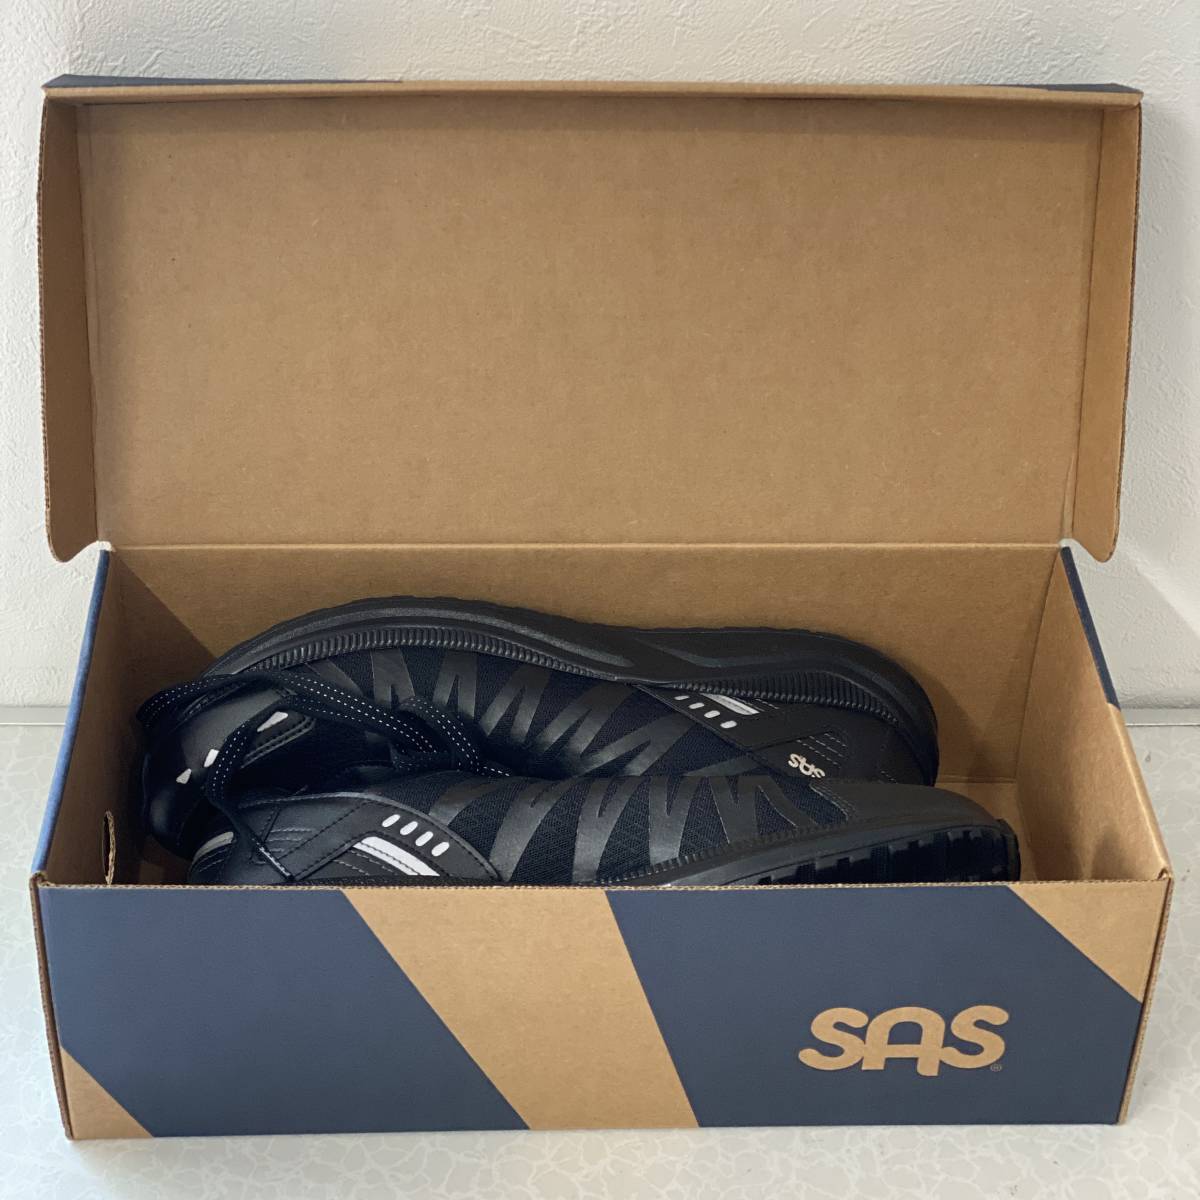  unused goods America buy USA made SAS military MISSION1 training shoes sneakers the US armed forces 10D 230420